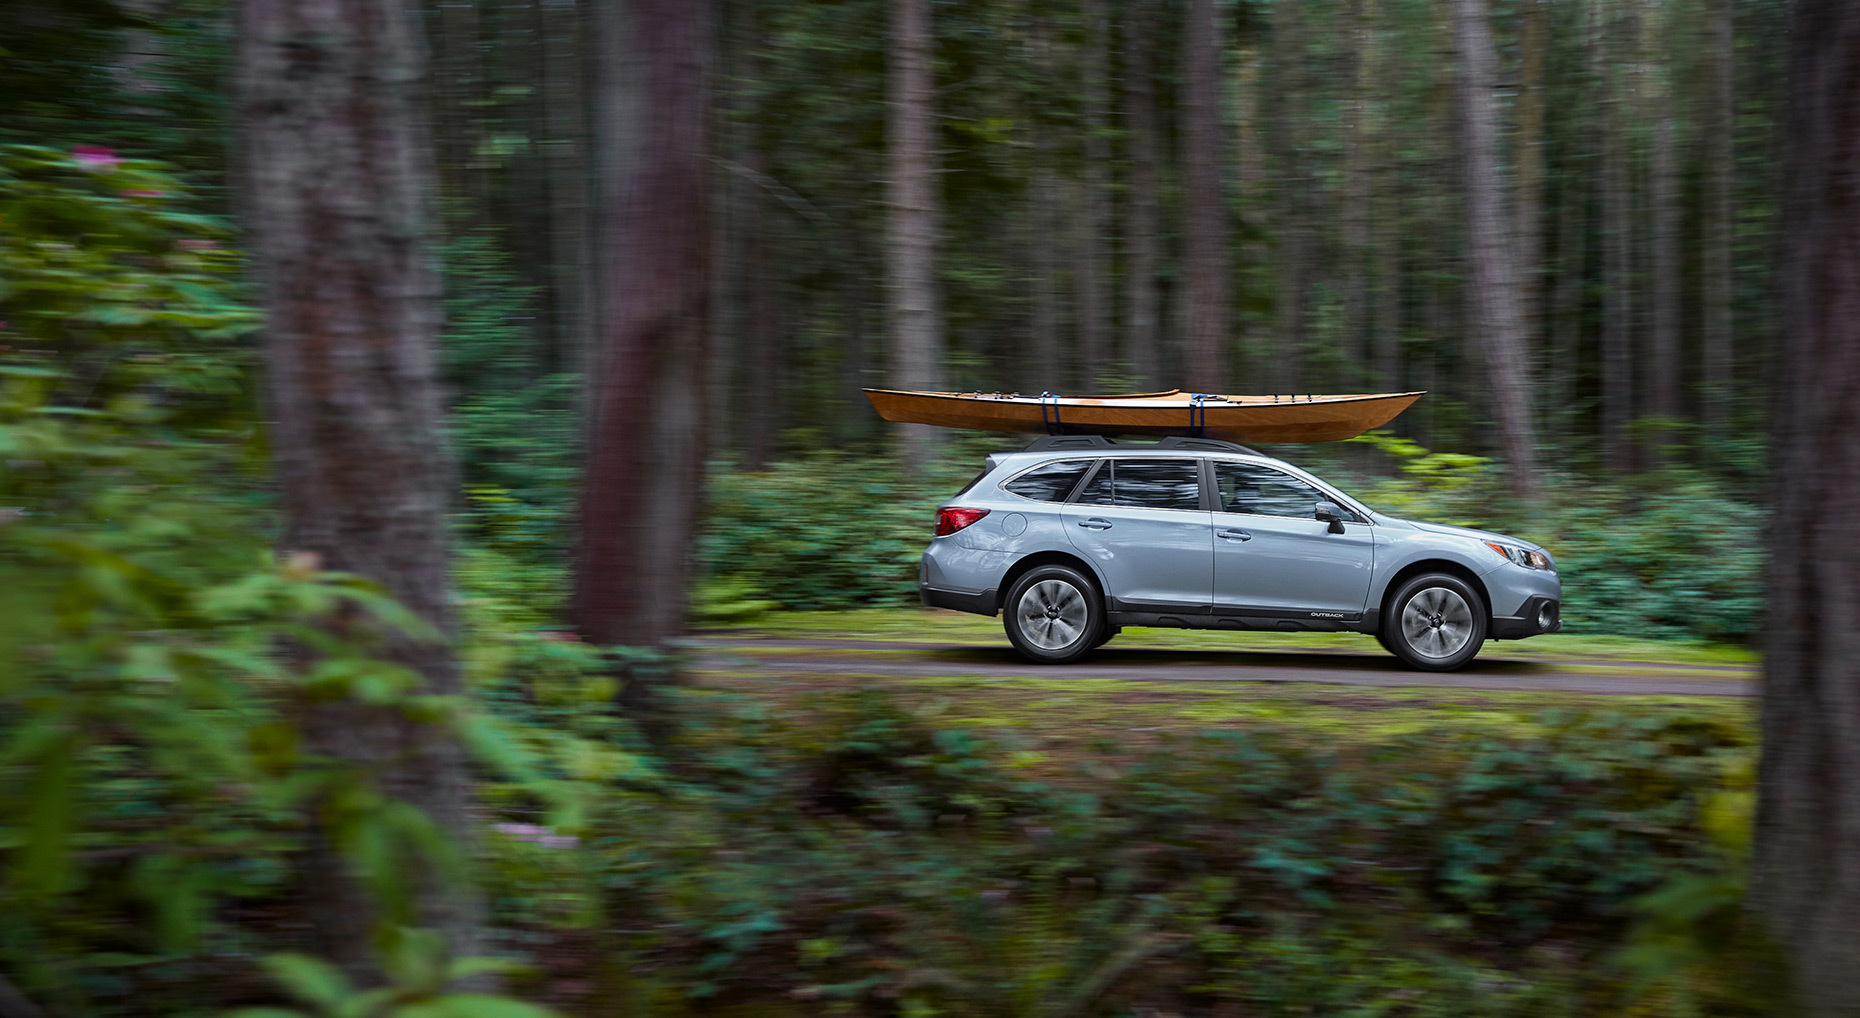 Christopher Nelson Photography|Subaru Outback|Forest|Seattle